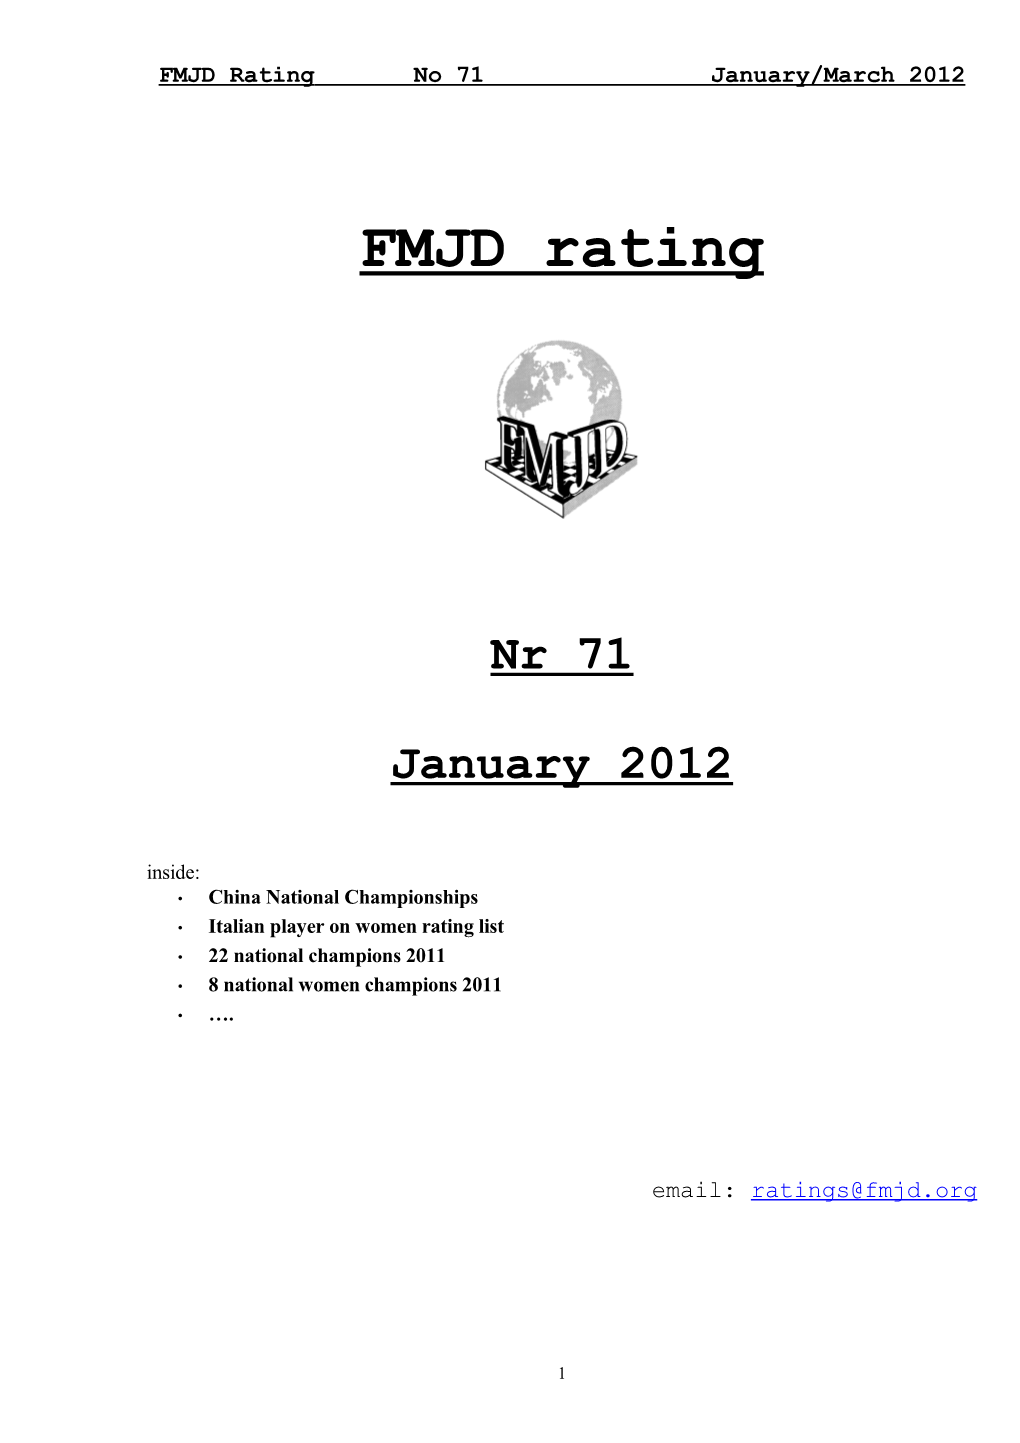 FMJD Rating No 71 January/March 2012